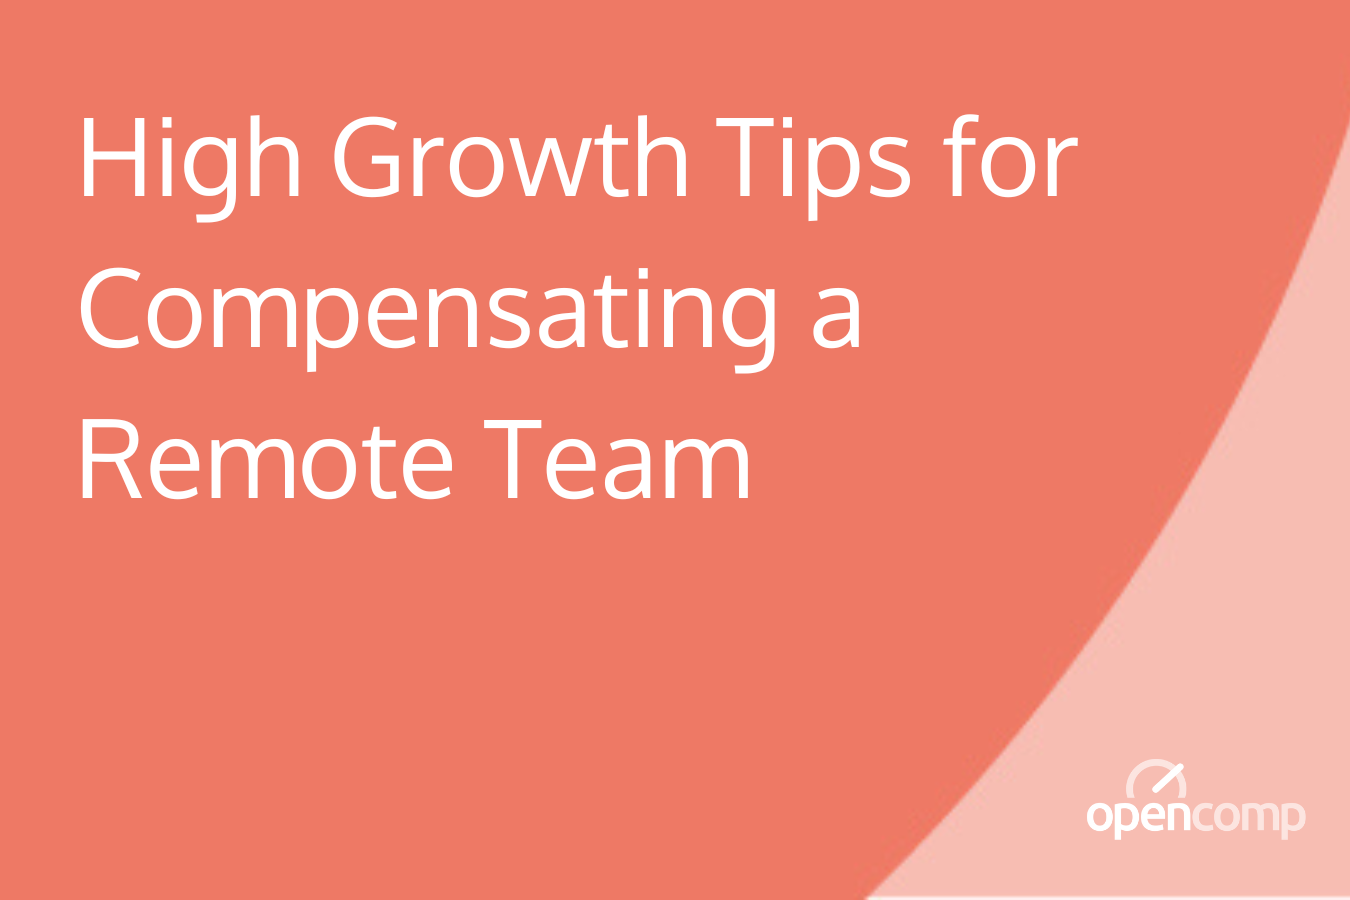 High Growth Tips for Compensating a Remote Team